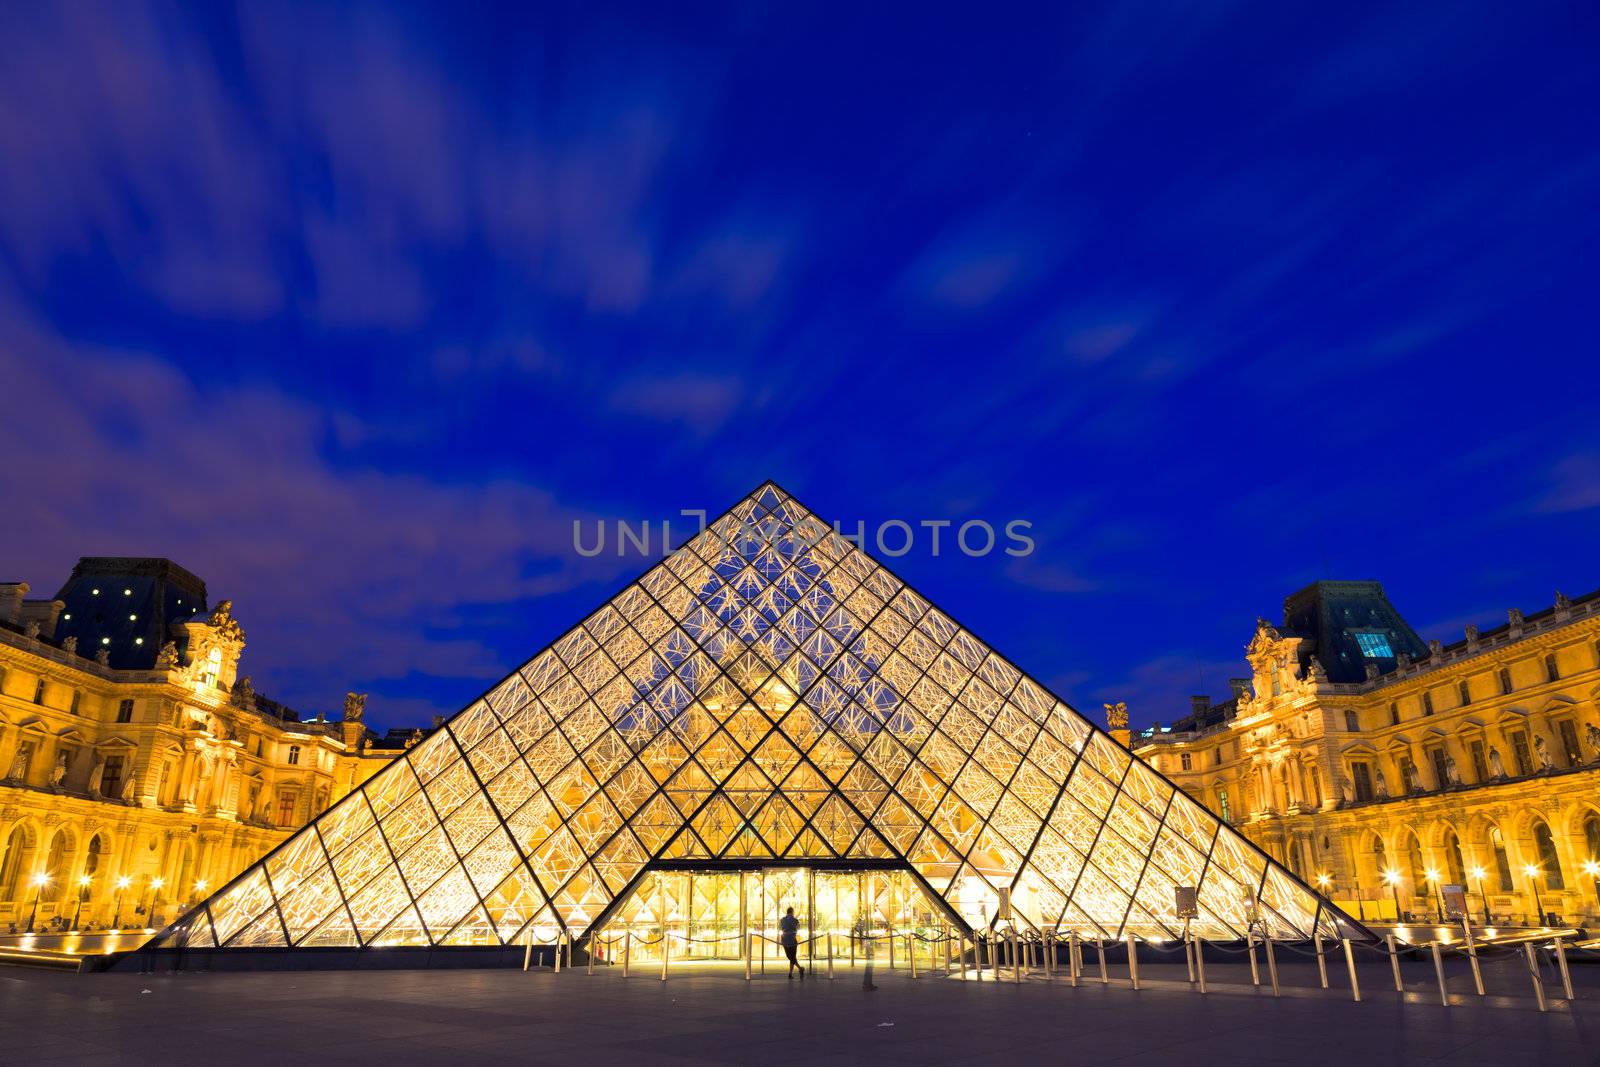 PARIS - AUGUST 05, 2010: 
The Louvre at night on August 05, 2010 in Paris, France. EDITORIAL USE ONLY.